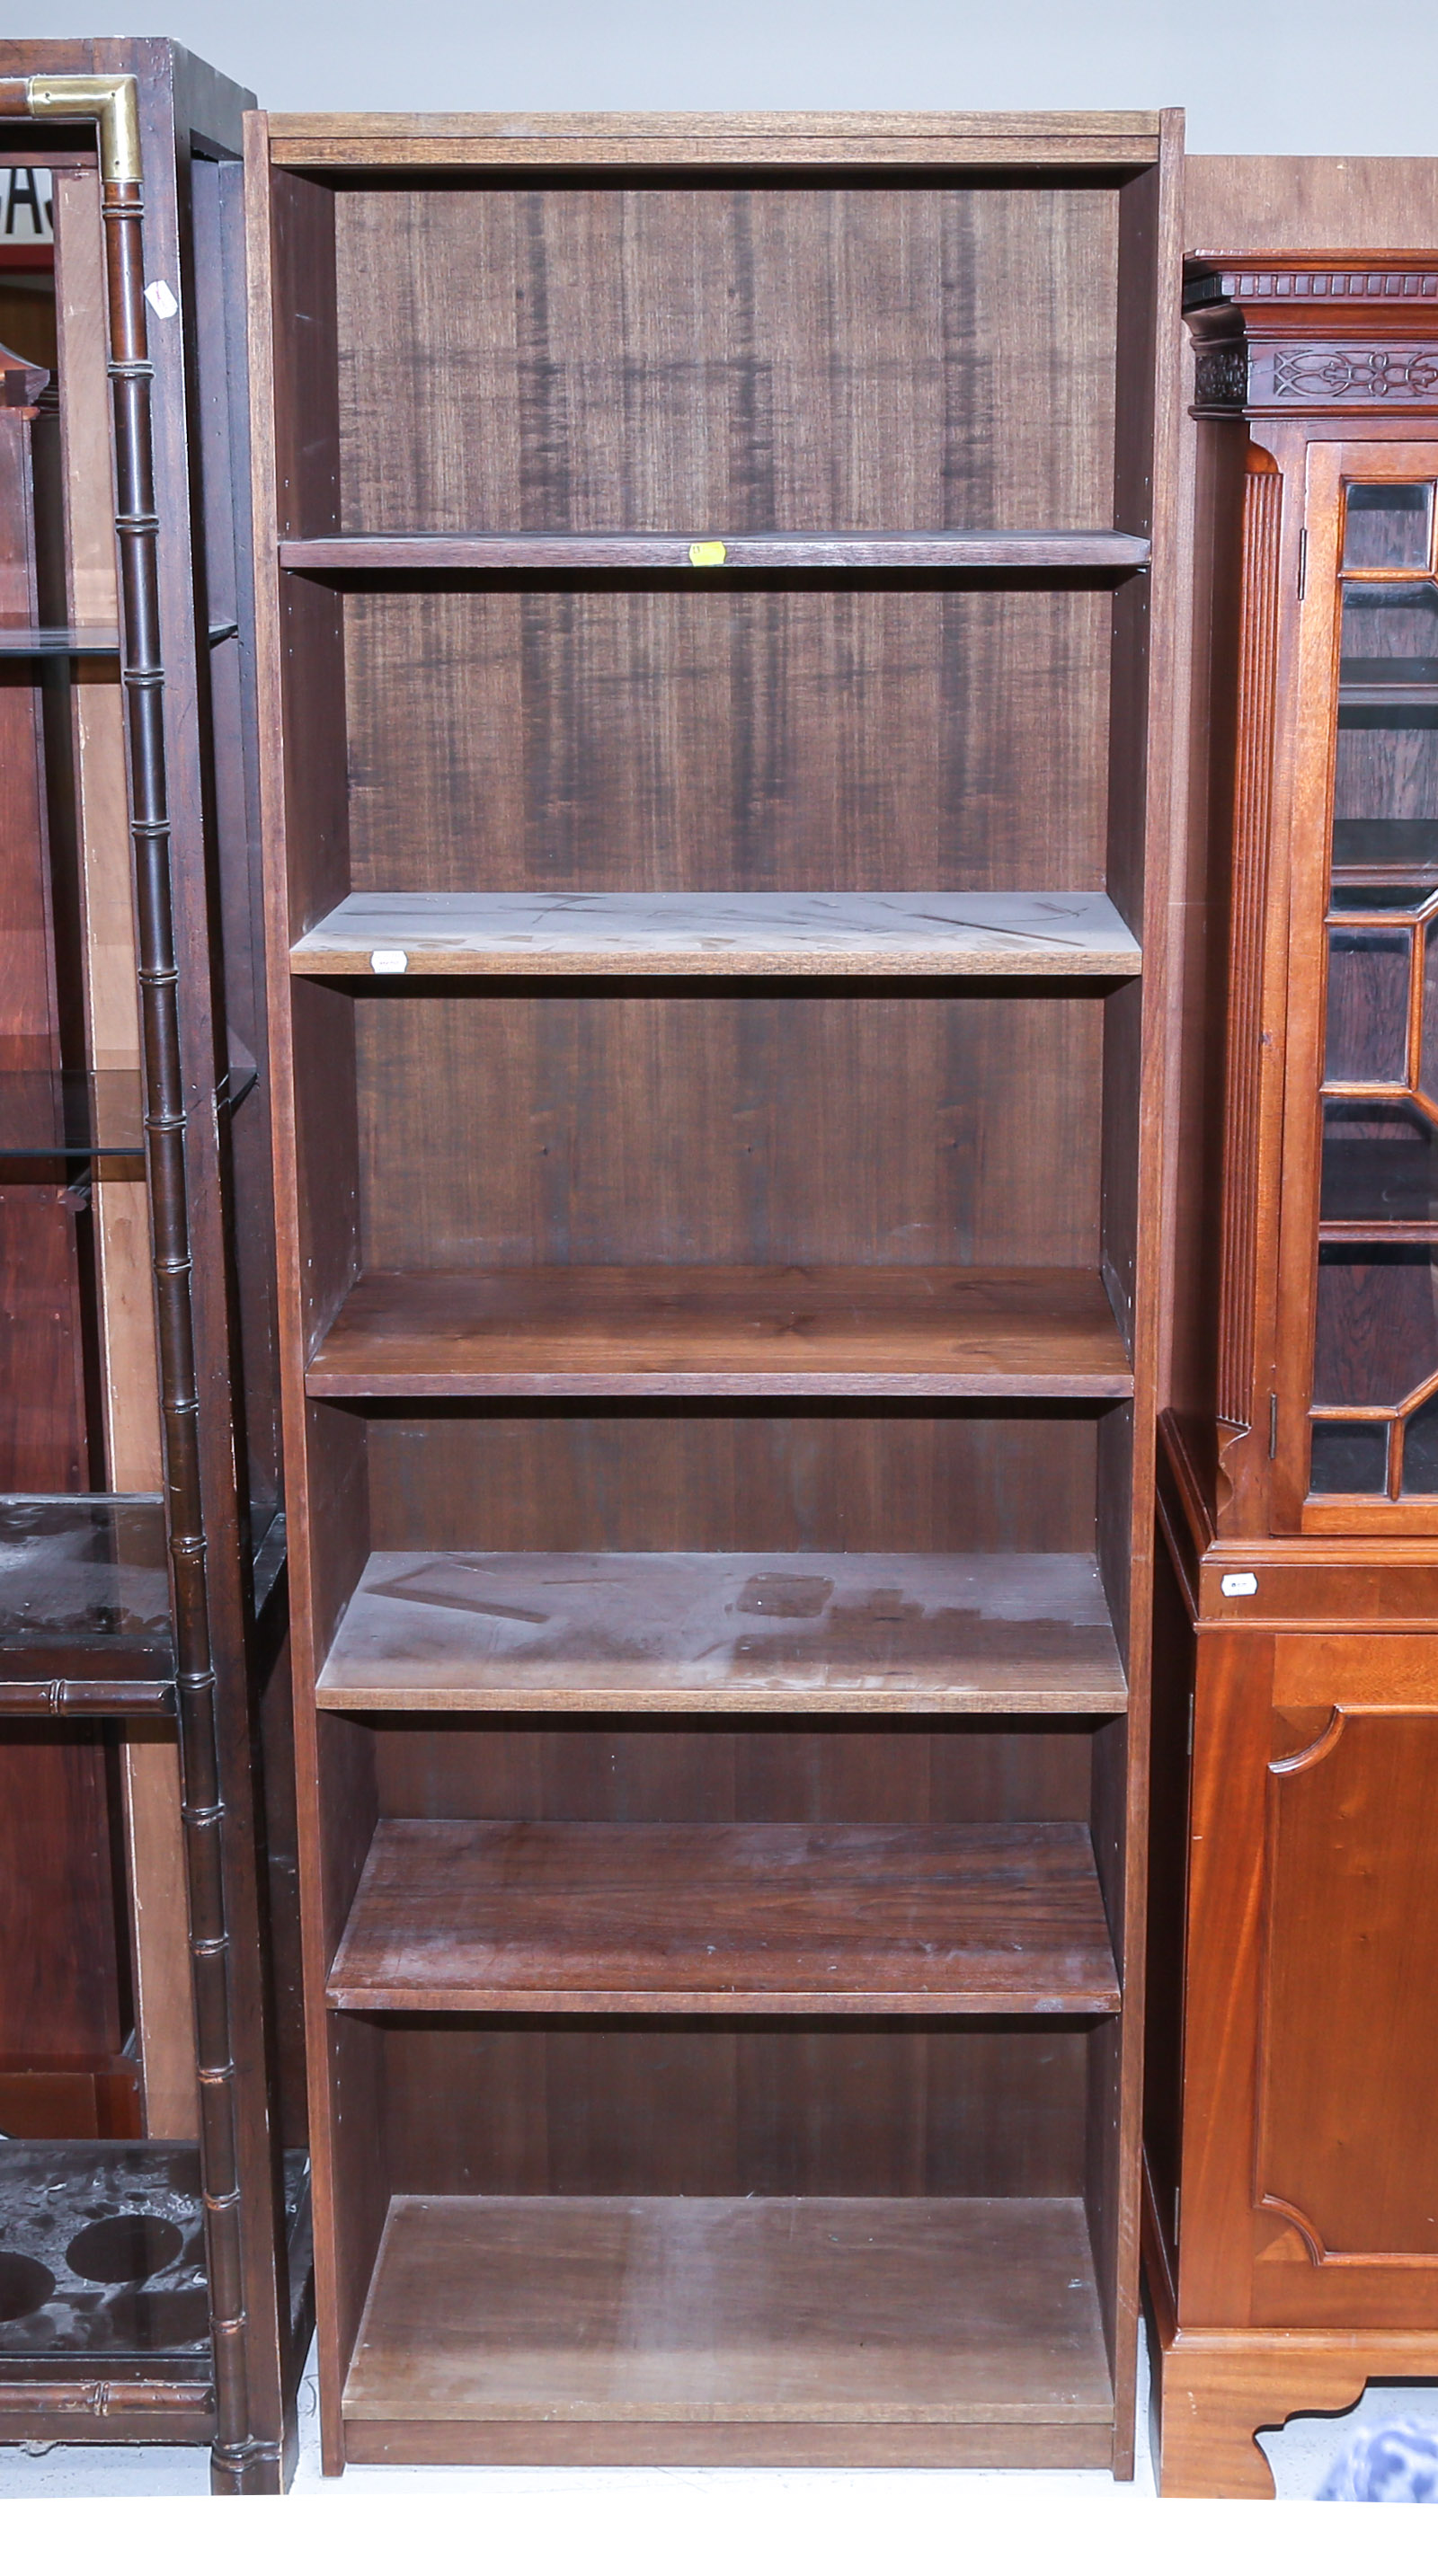 WALNUT BOOKCASE 76 1/4 in. H., approximately